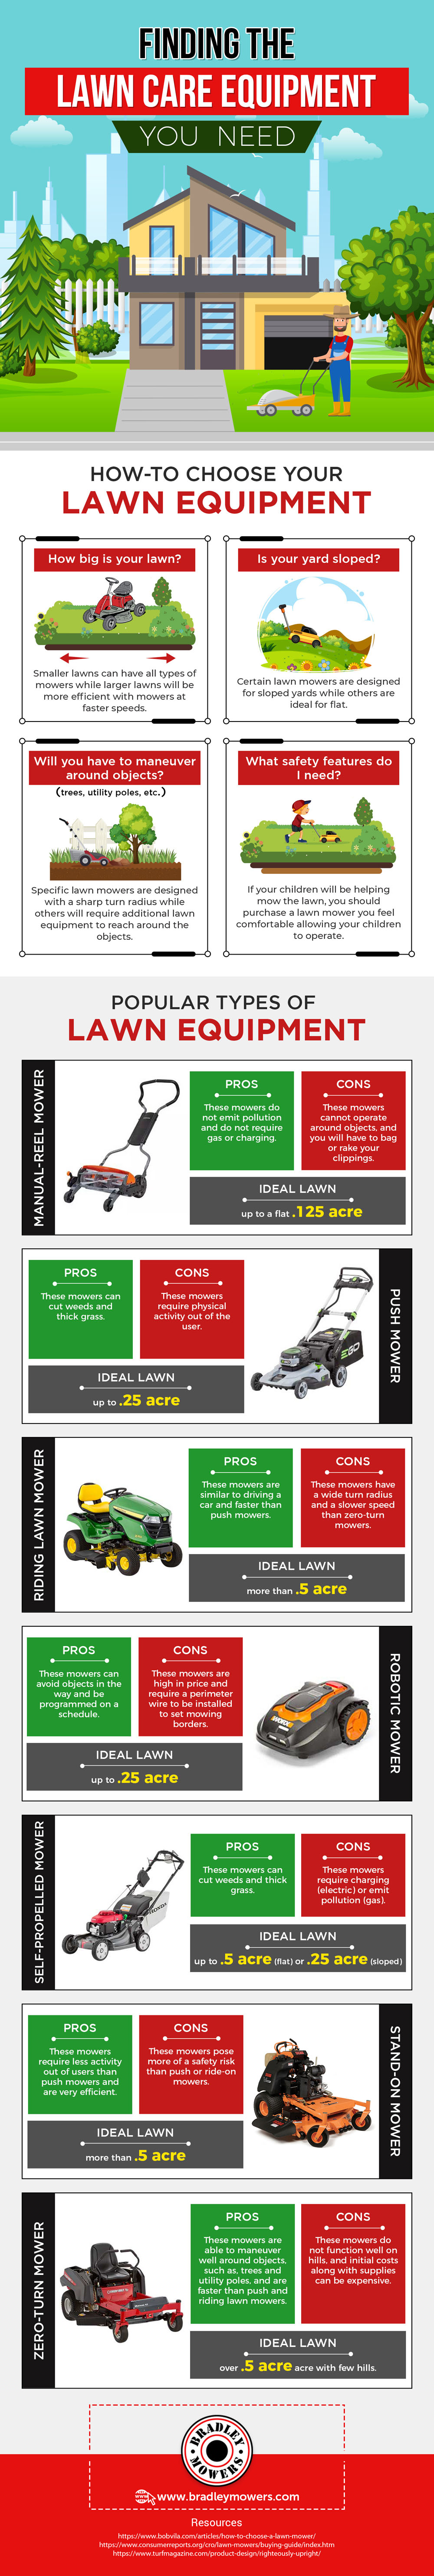 Finding the Lawn Care Equipment You Need